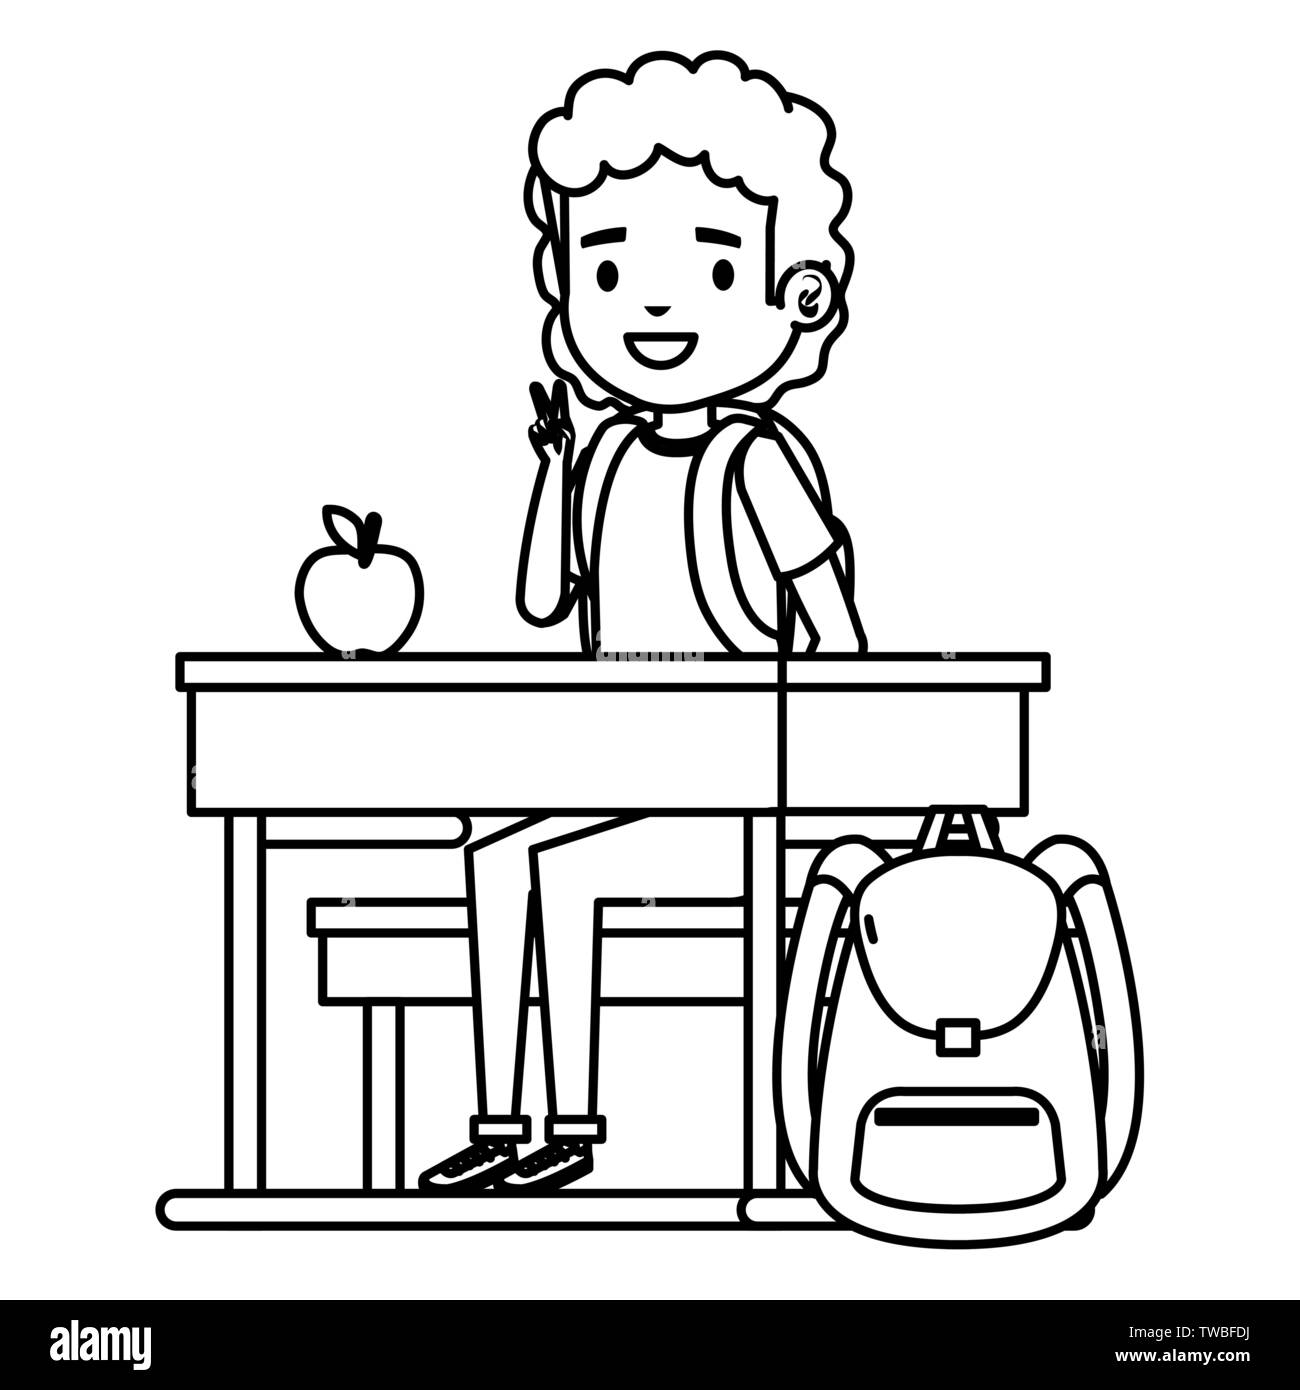 student boy seated in school desk with apple and bag Stock Vector